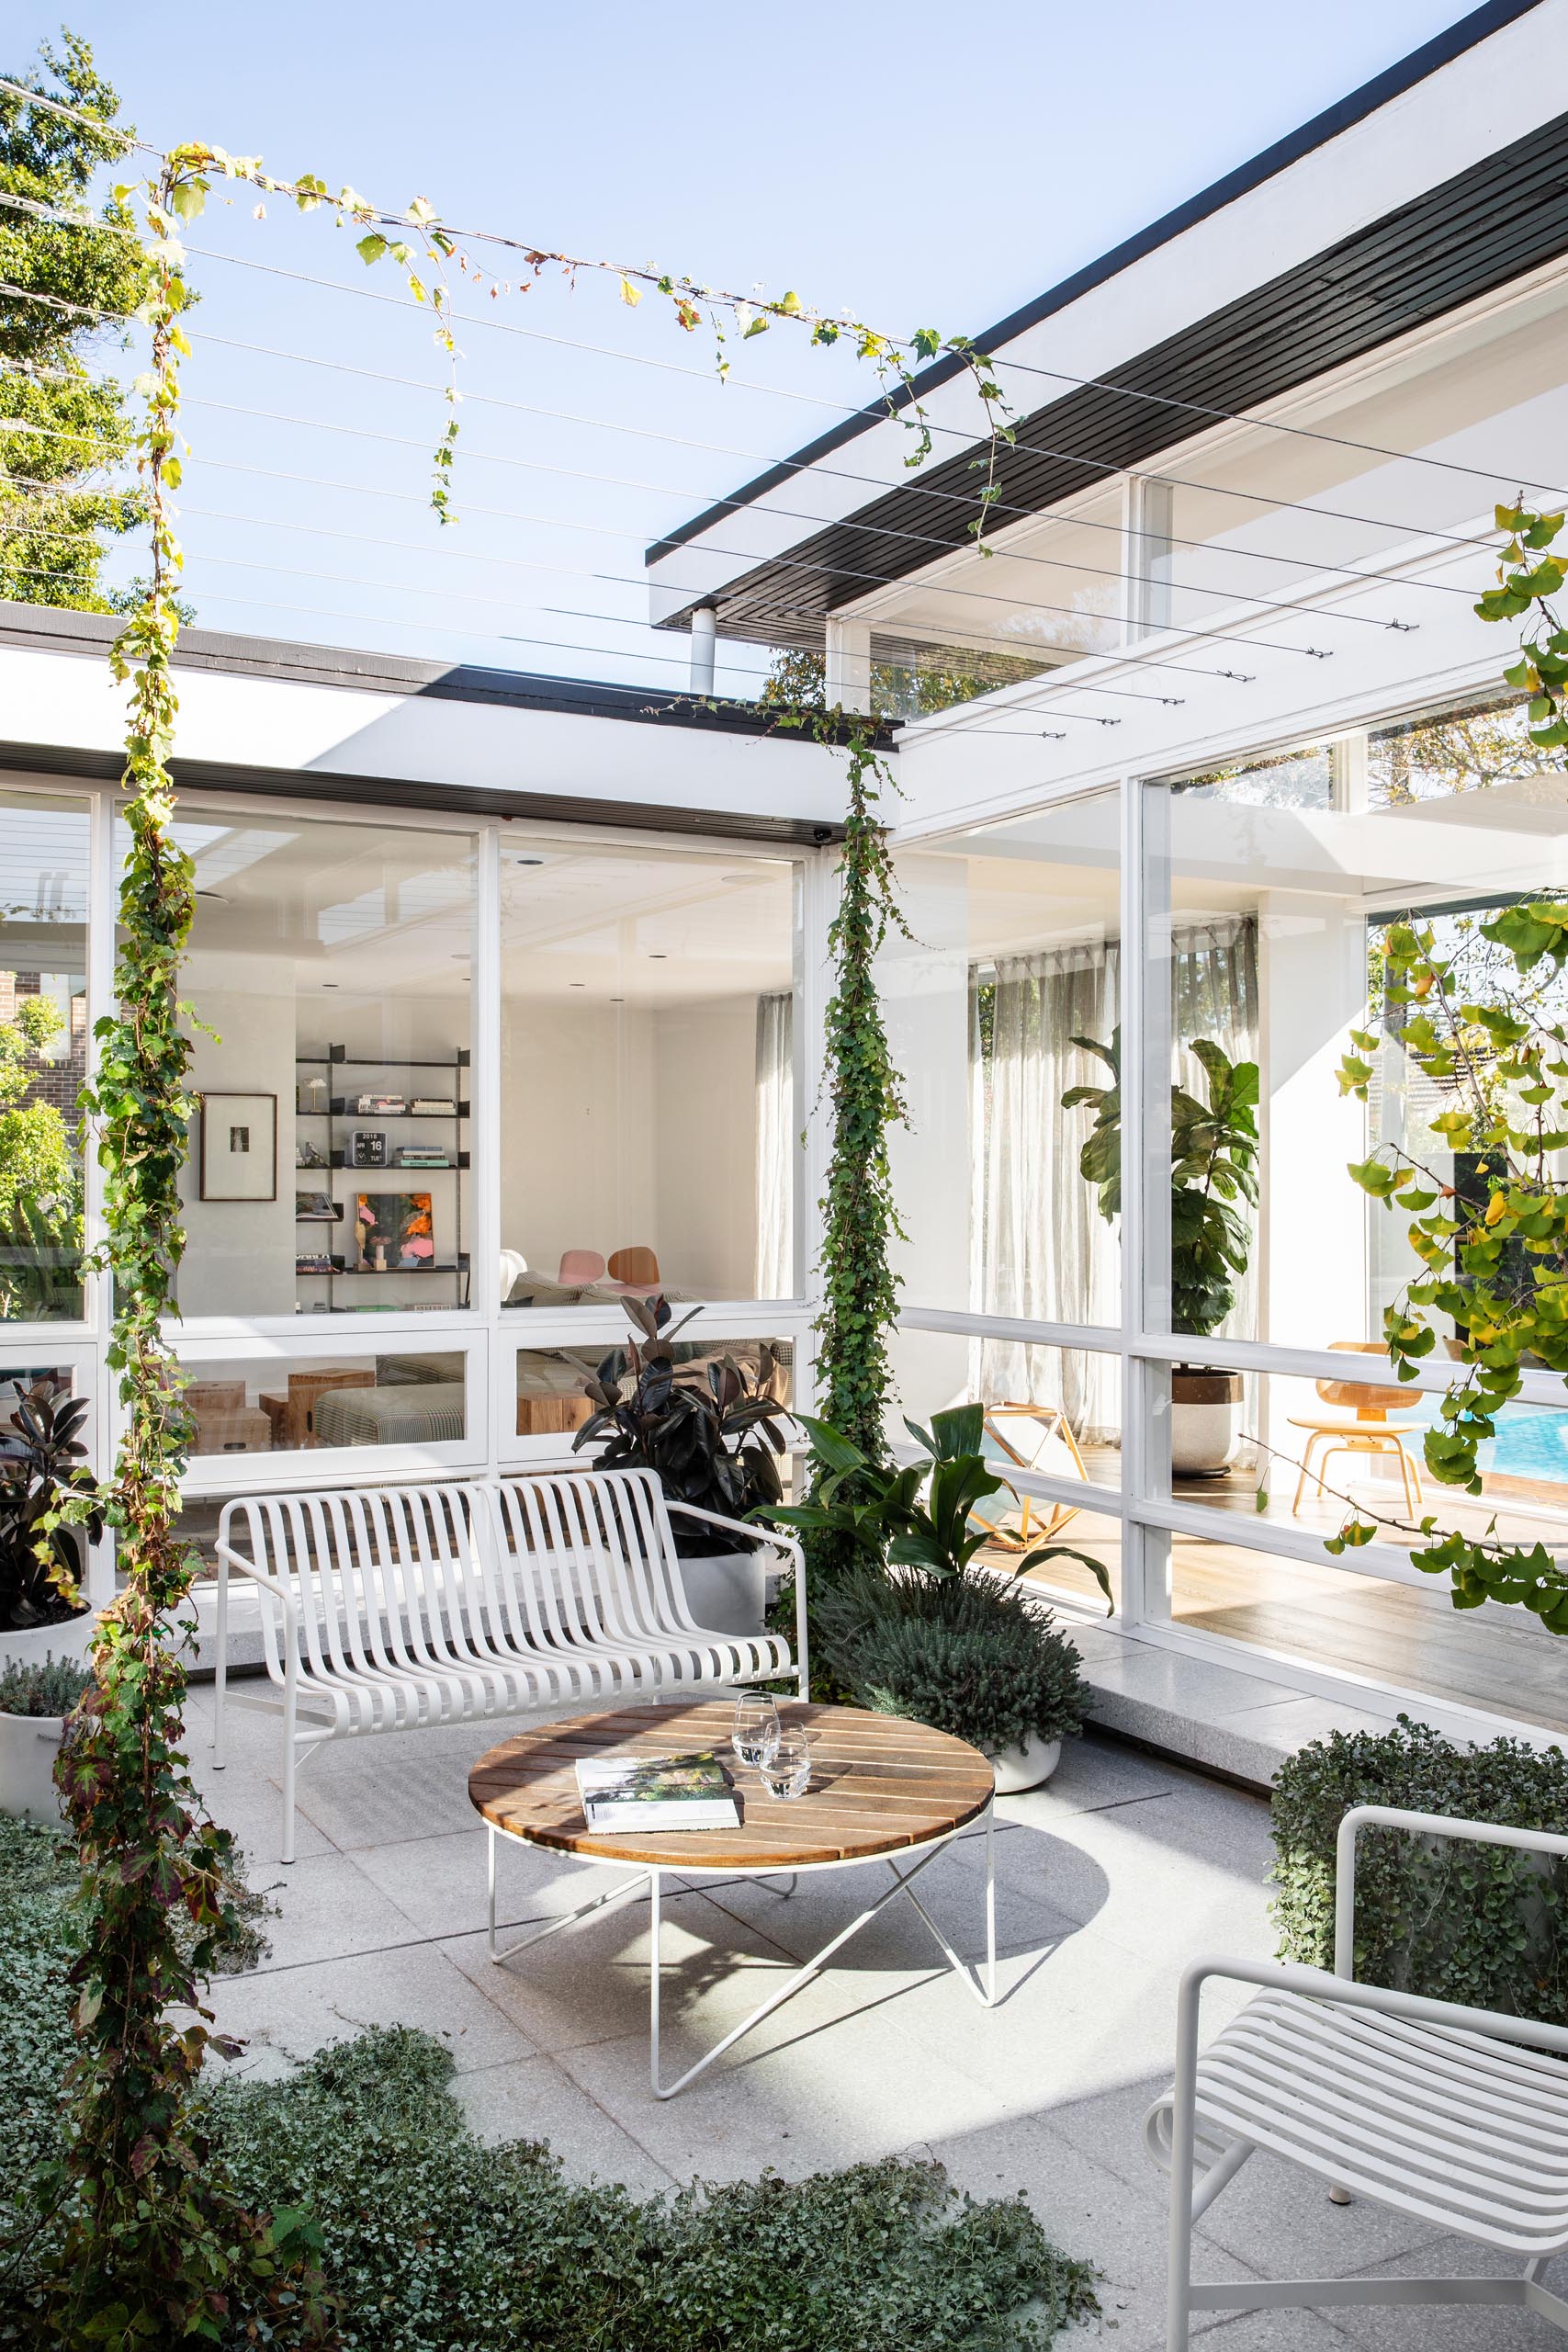 A central light-drenched courtyard has vines that will create a shaded outdoor space, furnished with planters and simple furniture.